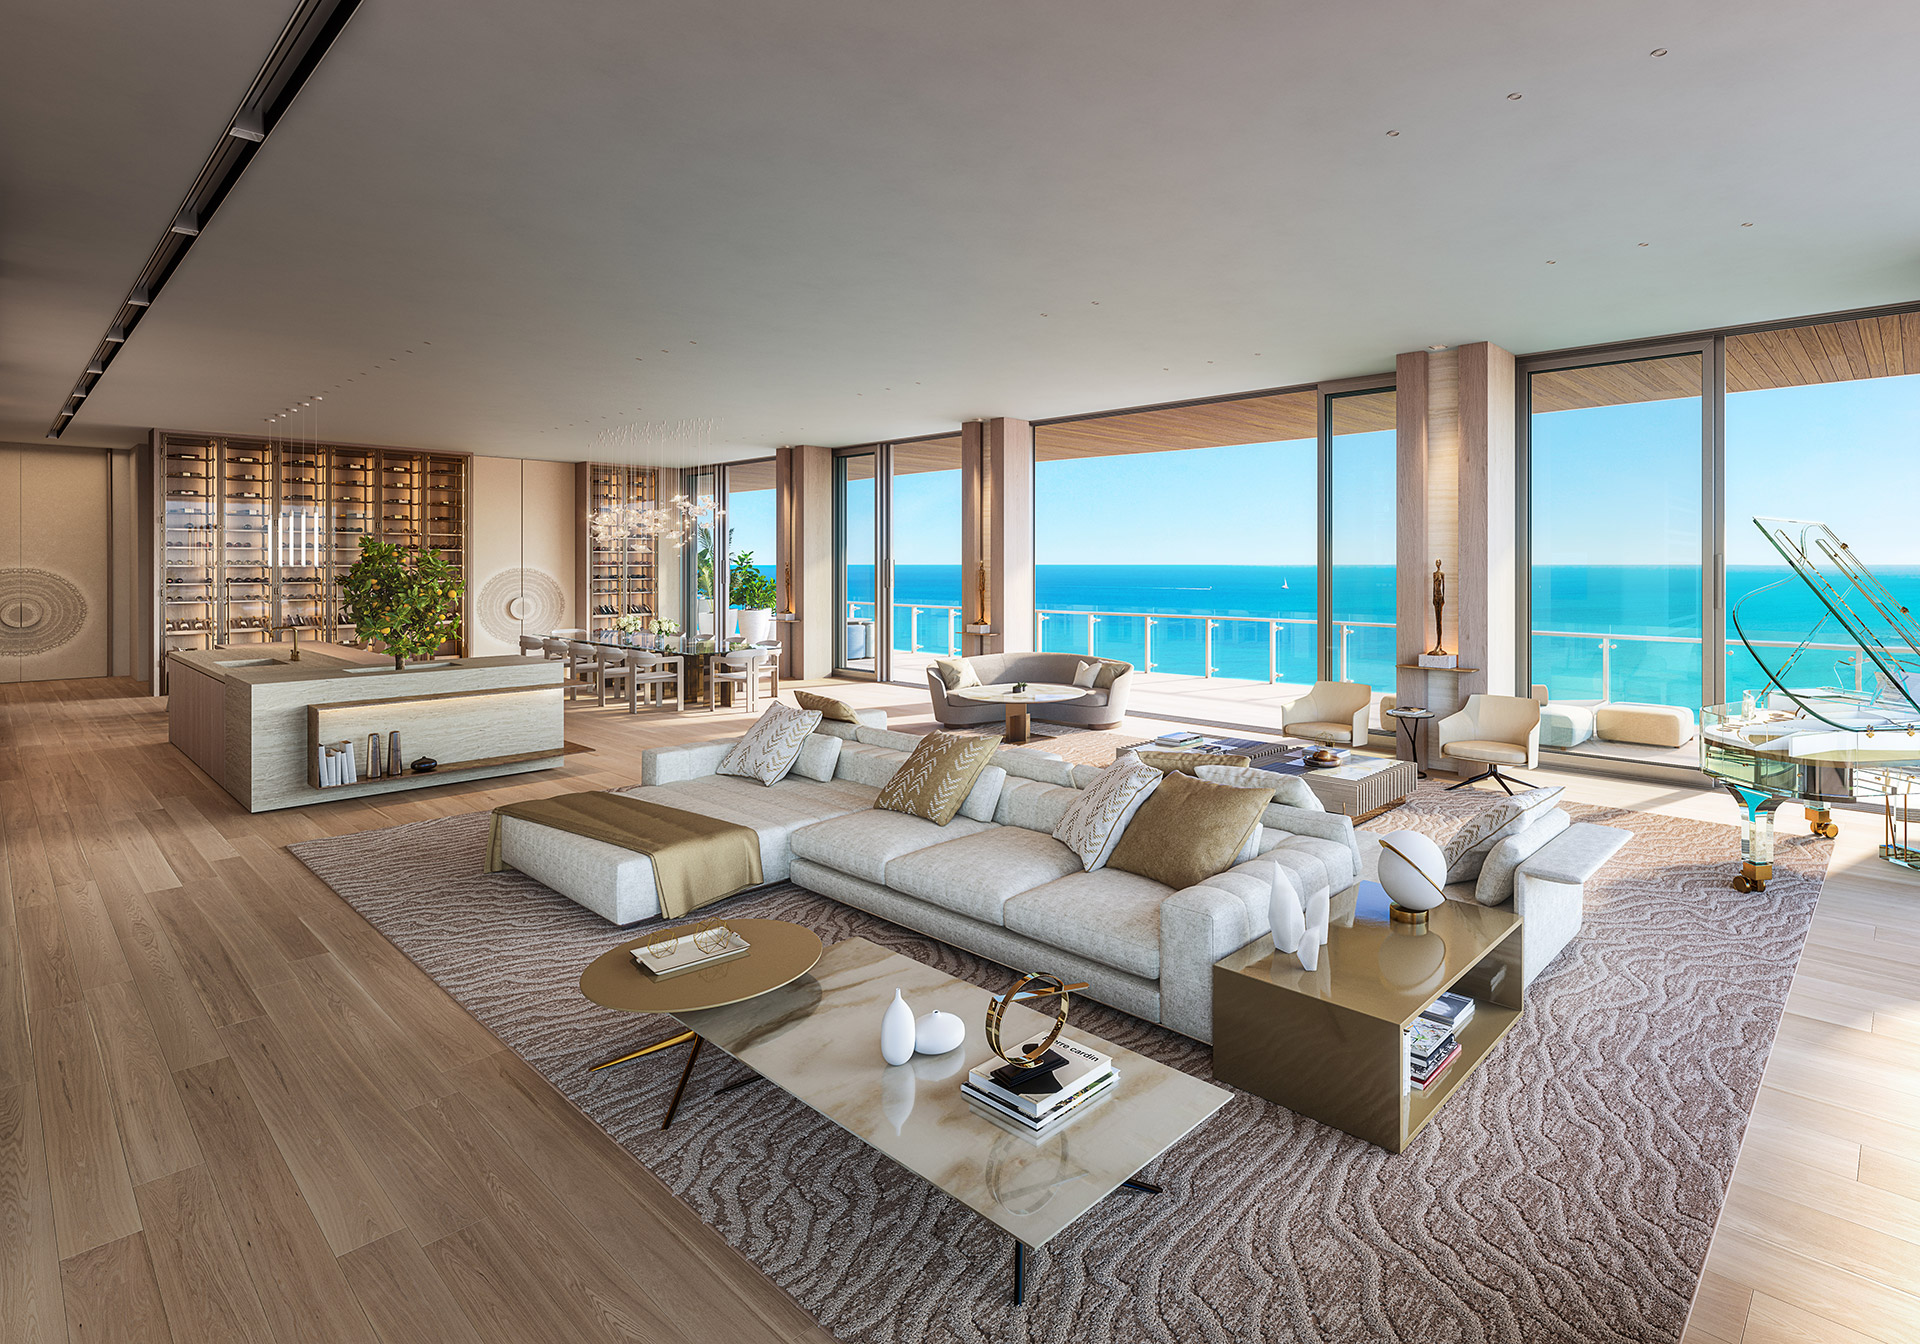 A spacious, modern living room with beige and neutral tones features plush seating, large windows offering a stunning ocean view, wooden flooring, a contemporary kitchen with a wine display, and a stylish dining area. Considering selling your home quickly? This space opens to a balcony with outdoor seating. | MONEY6X